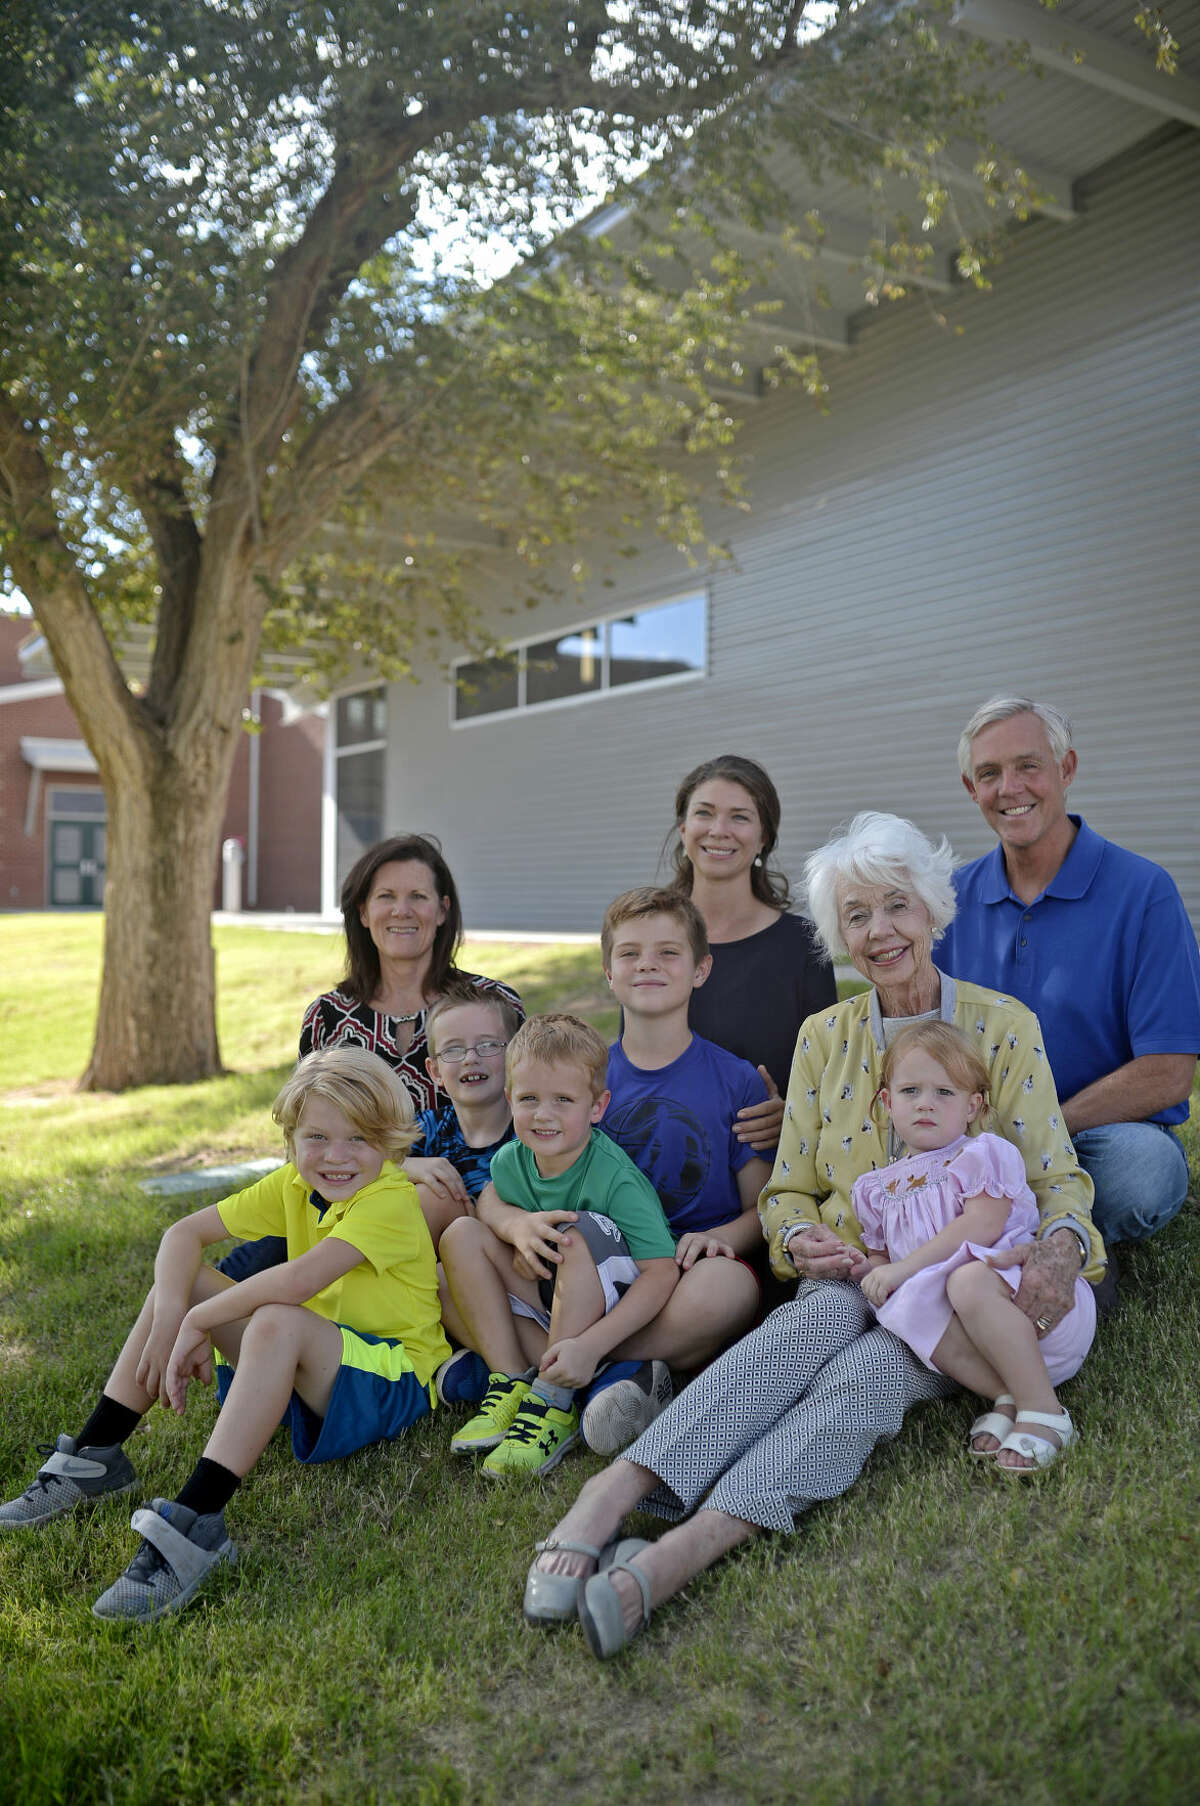 Wes Perry (far right) and wife Roni (far left) sit with mother Ricki Perry, and the children and grandchildren, totaling four generations of Midlanders with a connection to Bowie Fine Arts Academy and Midland schools. Photographed Friday, Sept. 23, 2016 at Bowie Fine Arts Academy.James Durbin/Reporter-Telegram